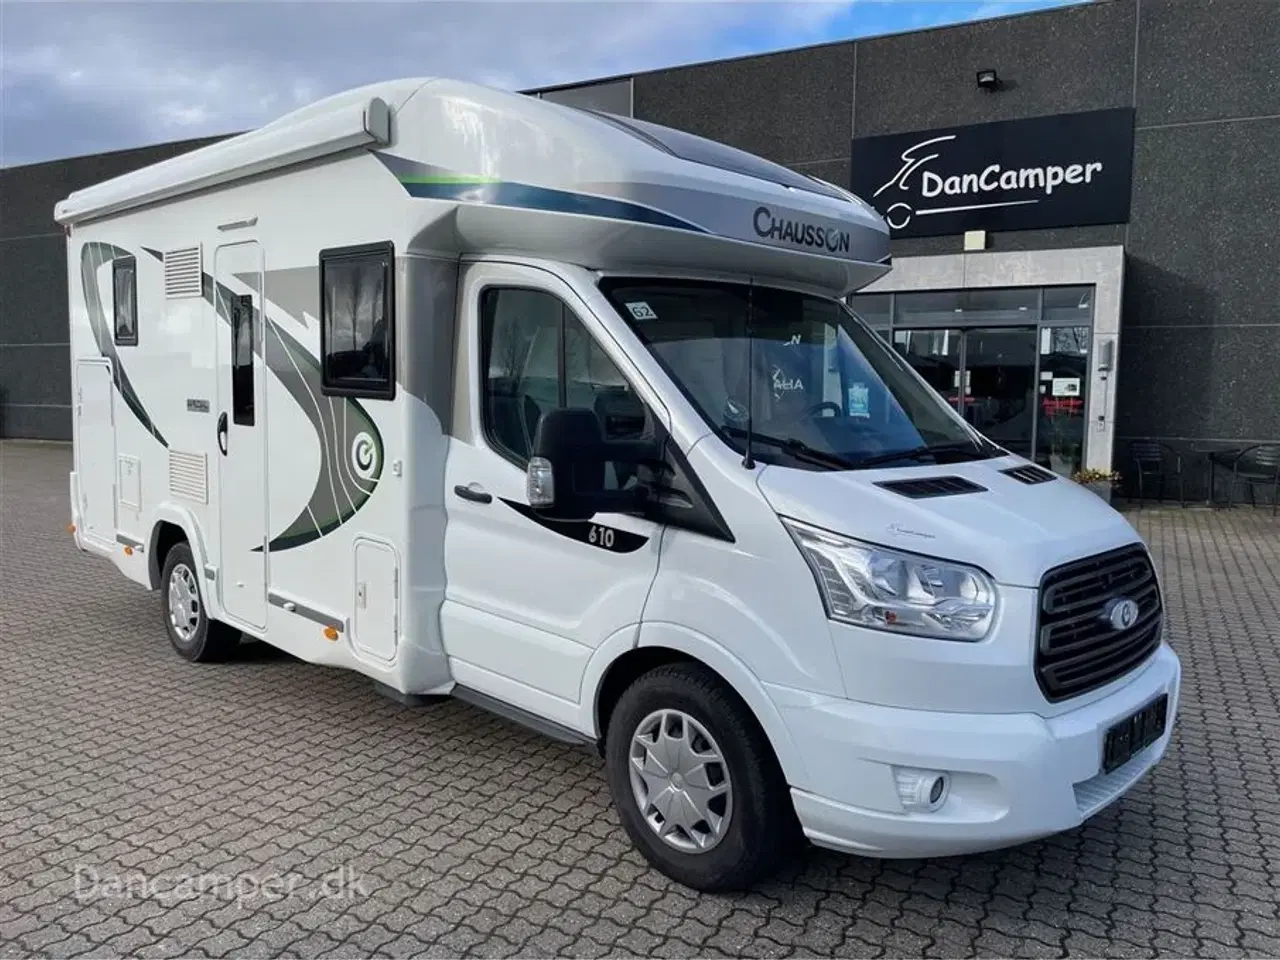 Billede 1 - 2018 - Chausson 610 Special Edition   2018 model Special Edition